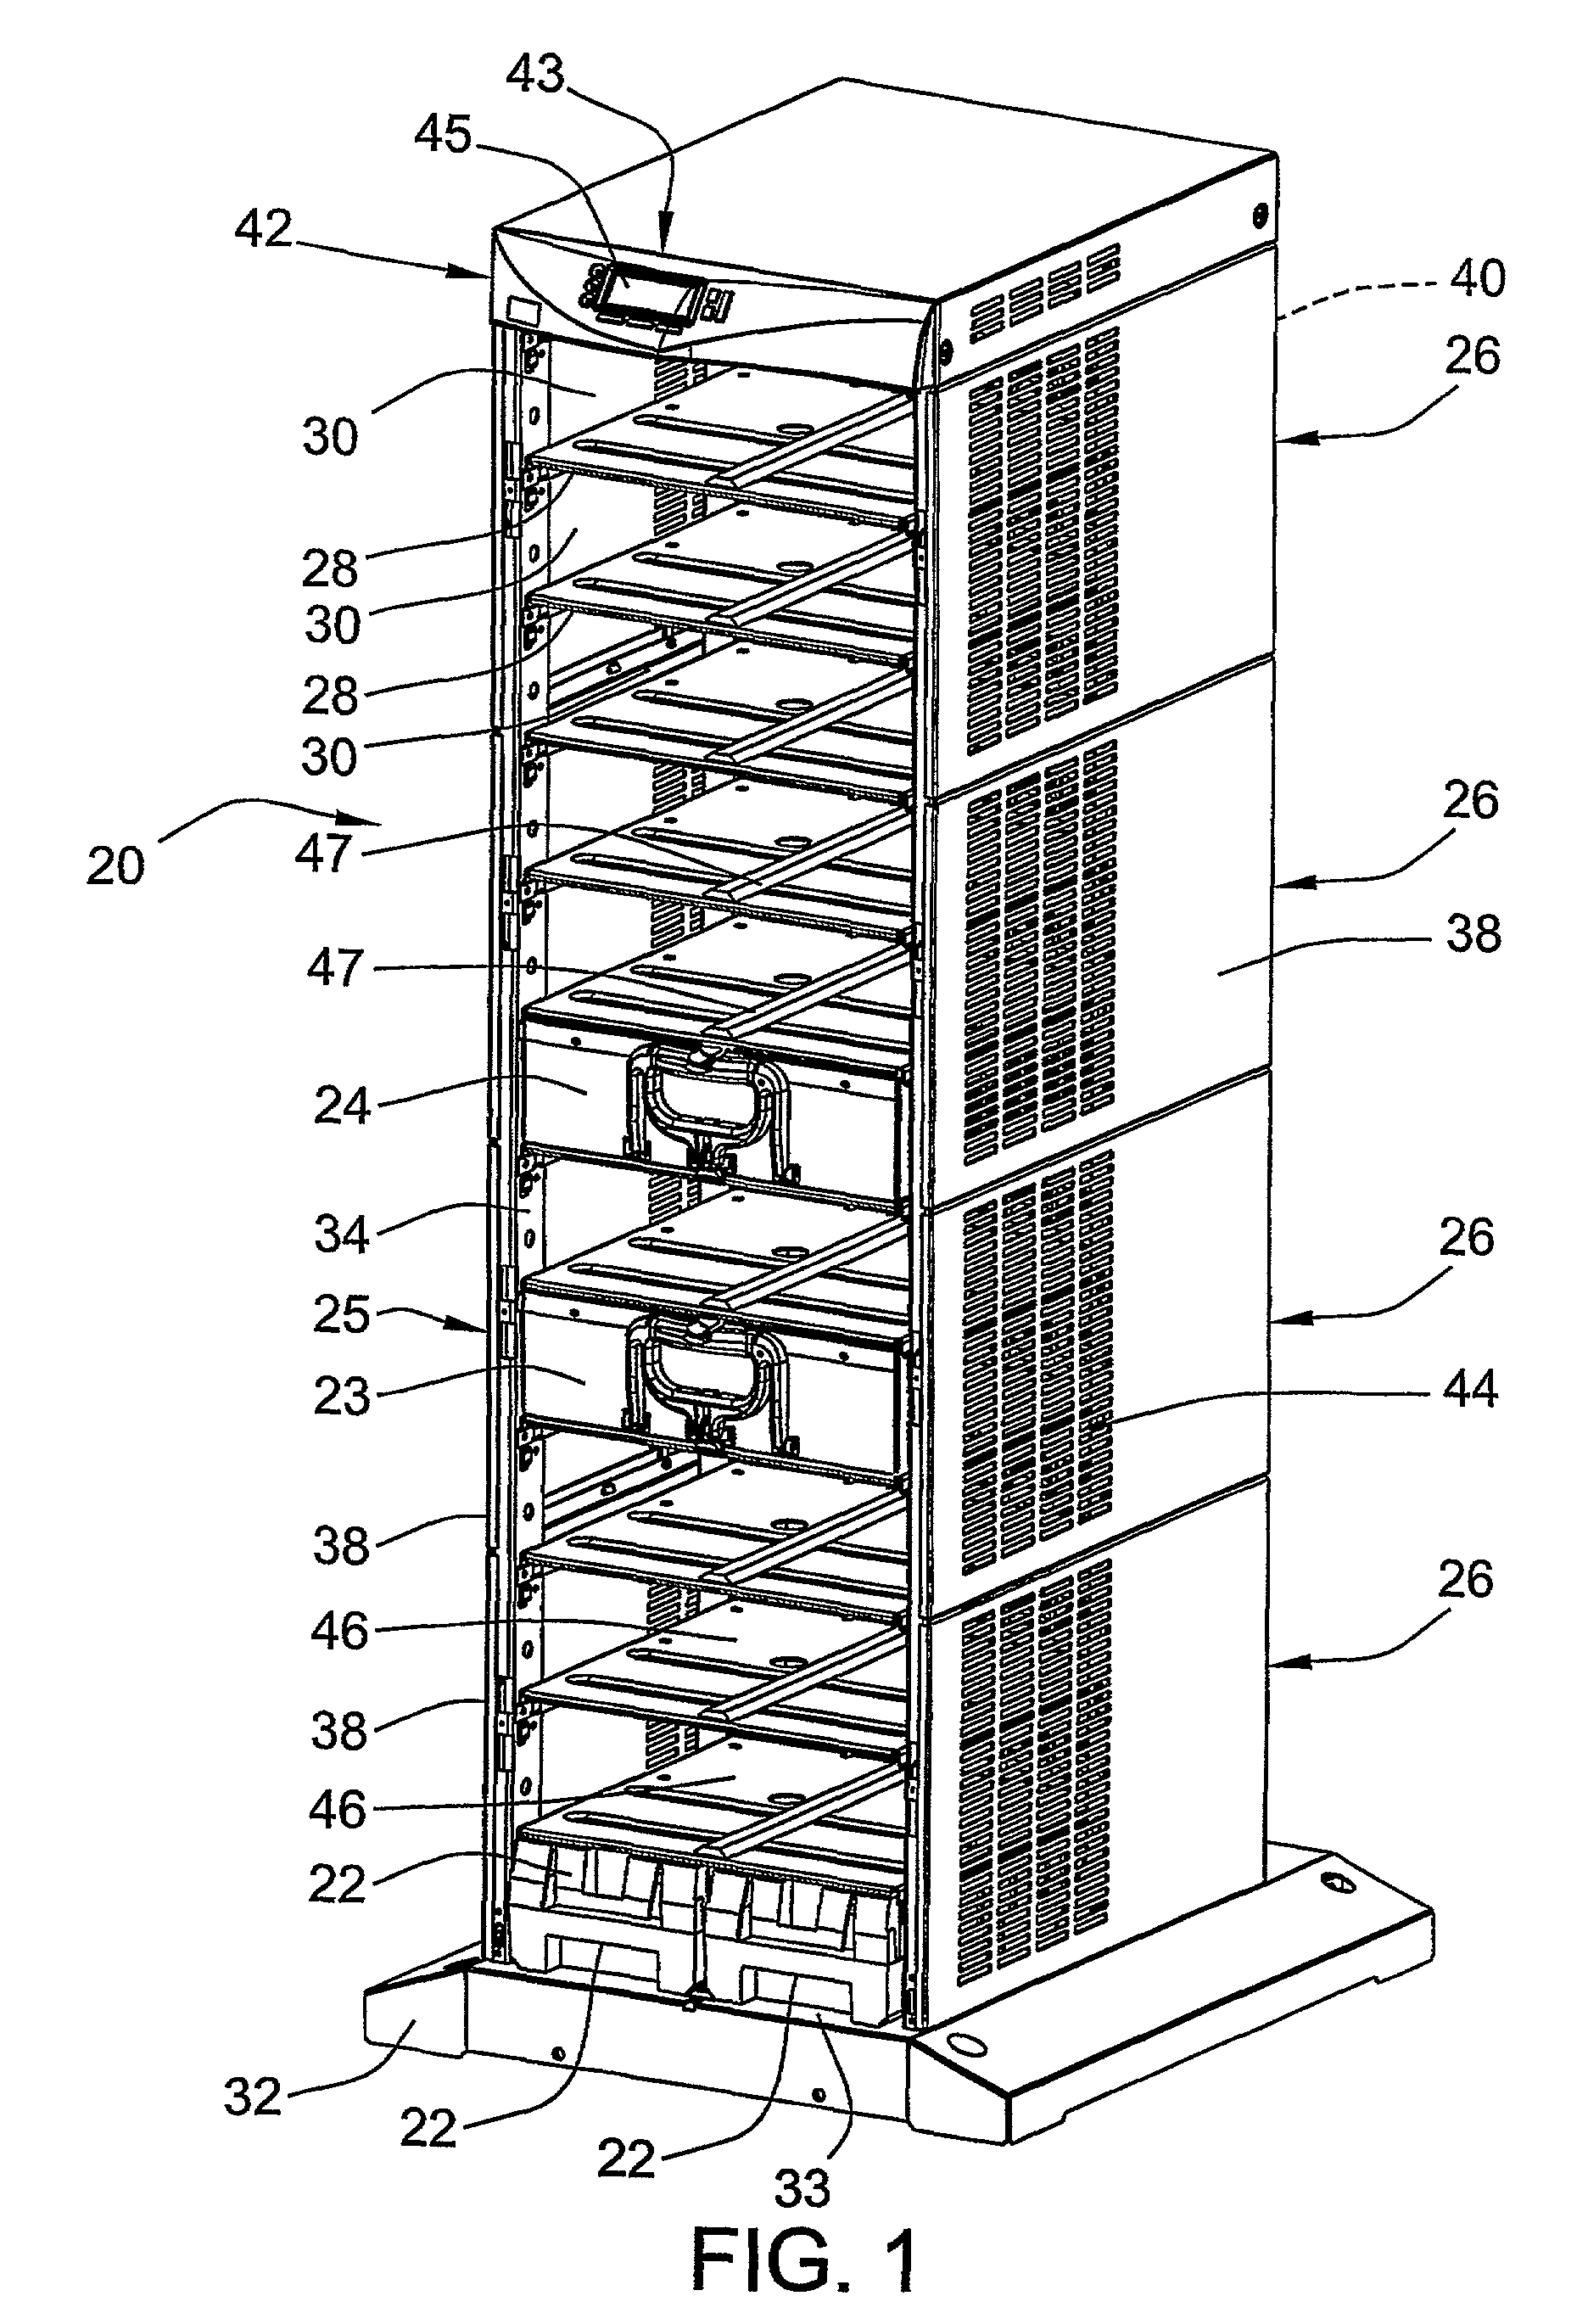 System for detecting defective battery packs